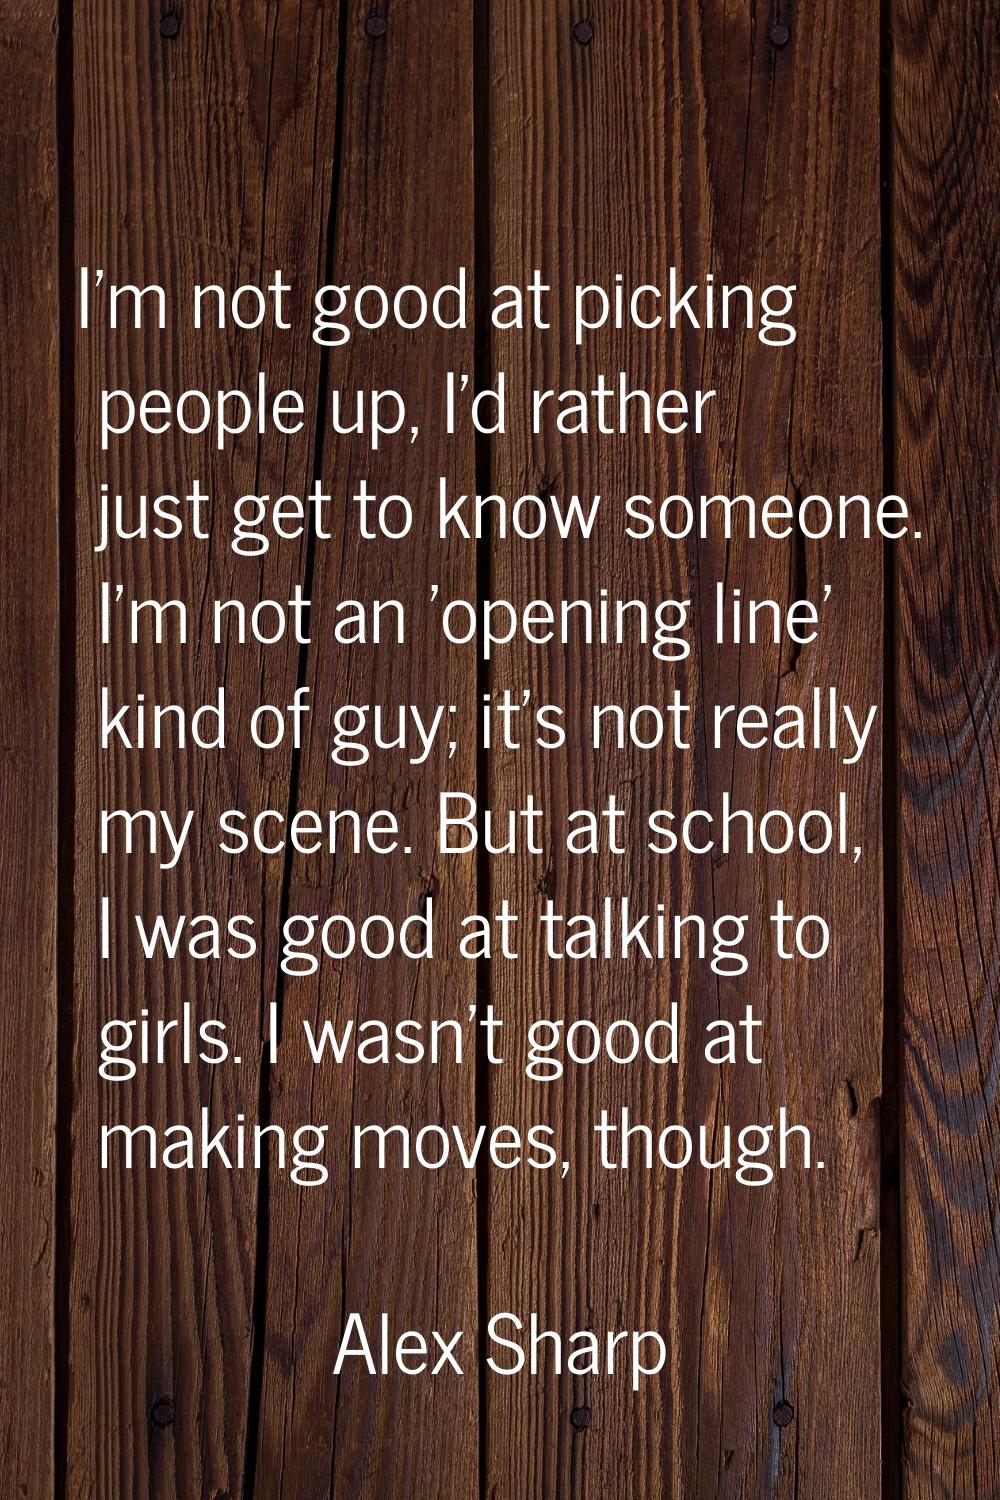 I'm not good at picking people up, I'd rather just get to know someone. I'm not an 'opening line' k